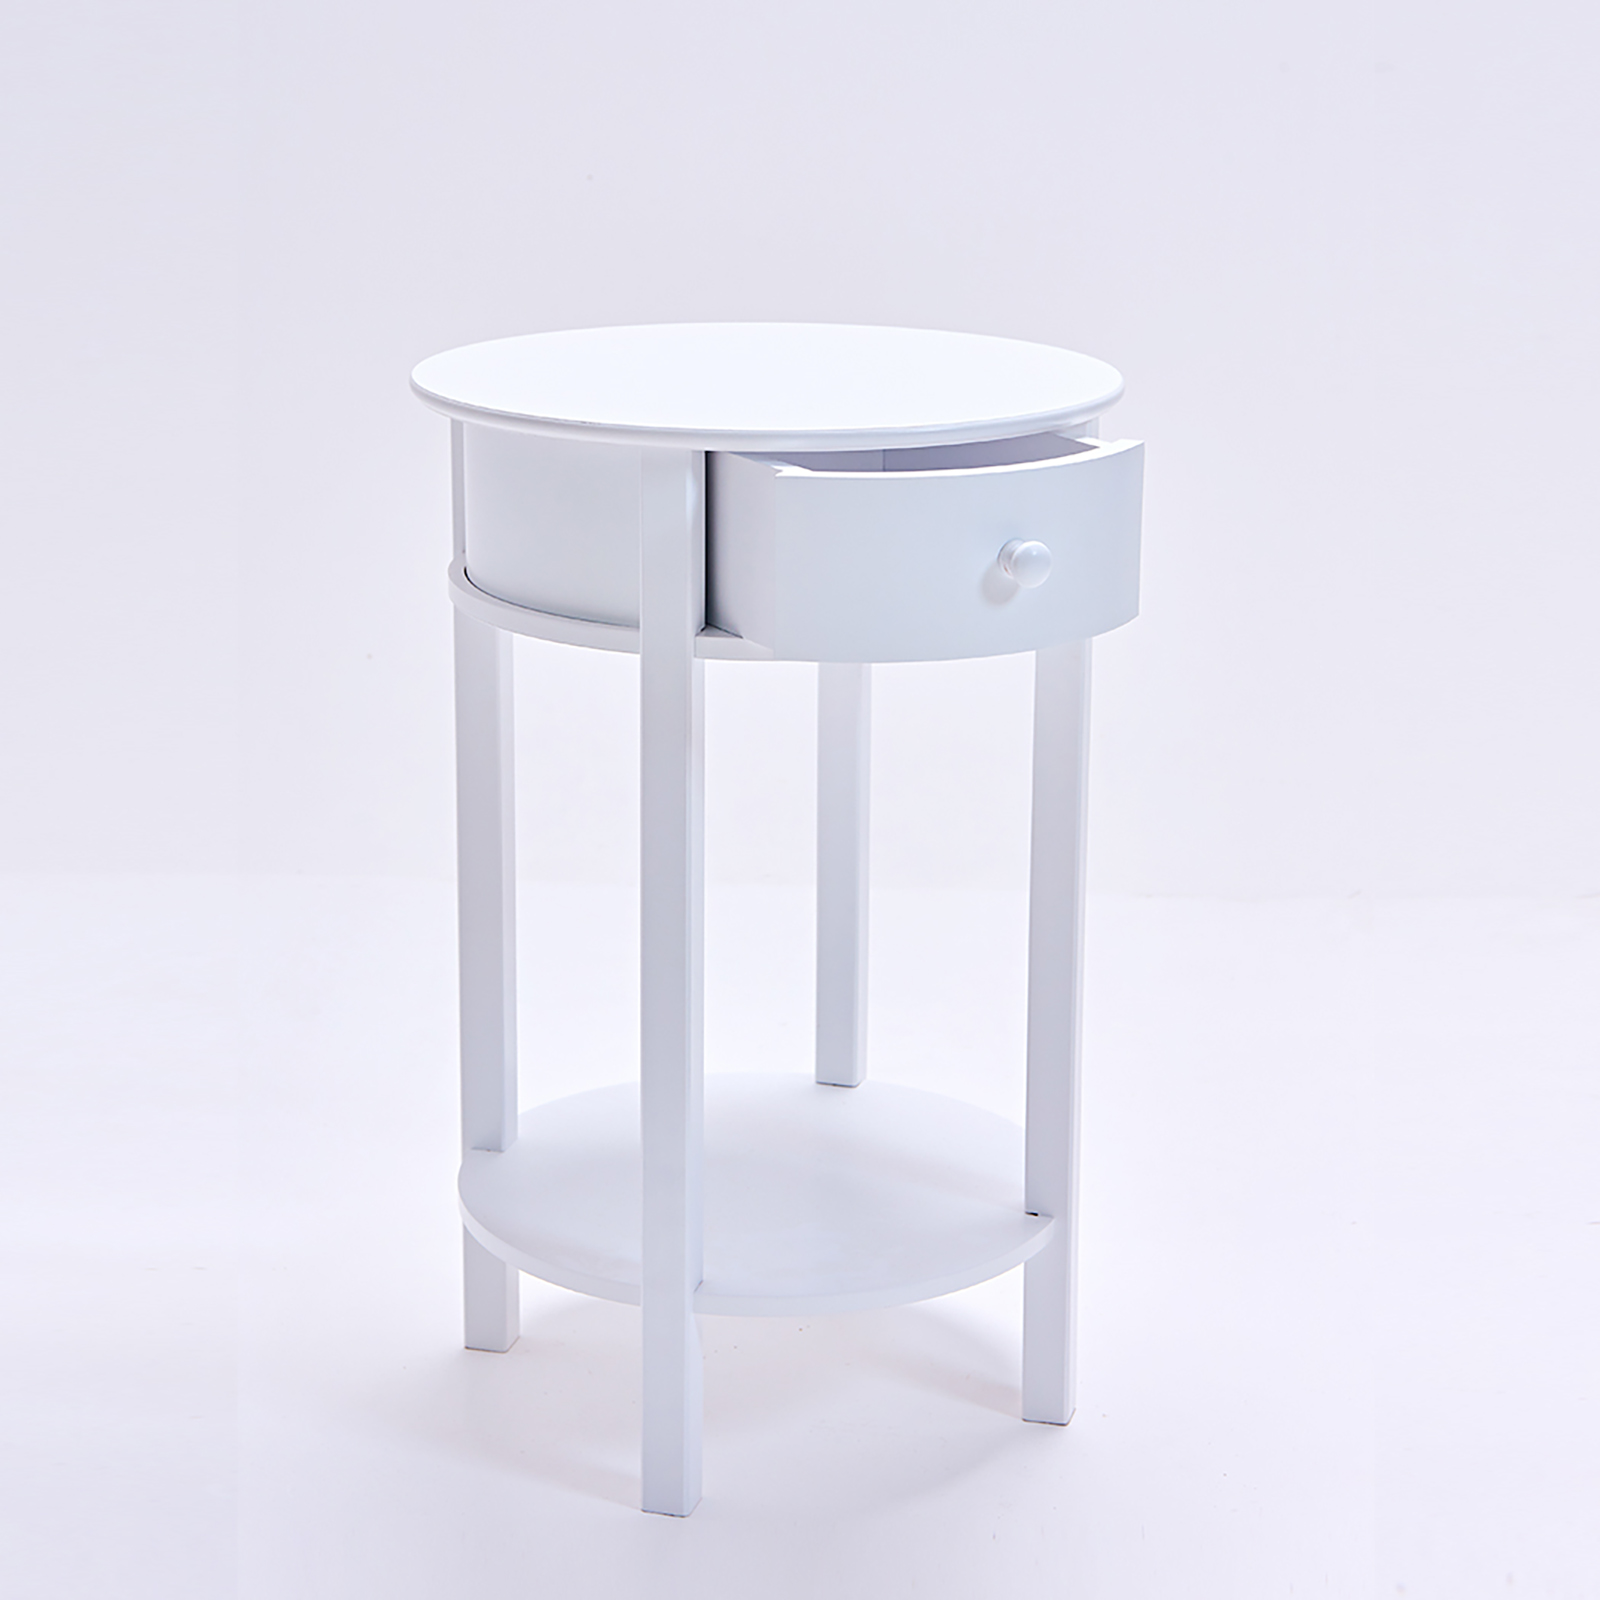   2 x Franco Round Side Table White 